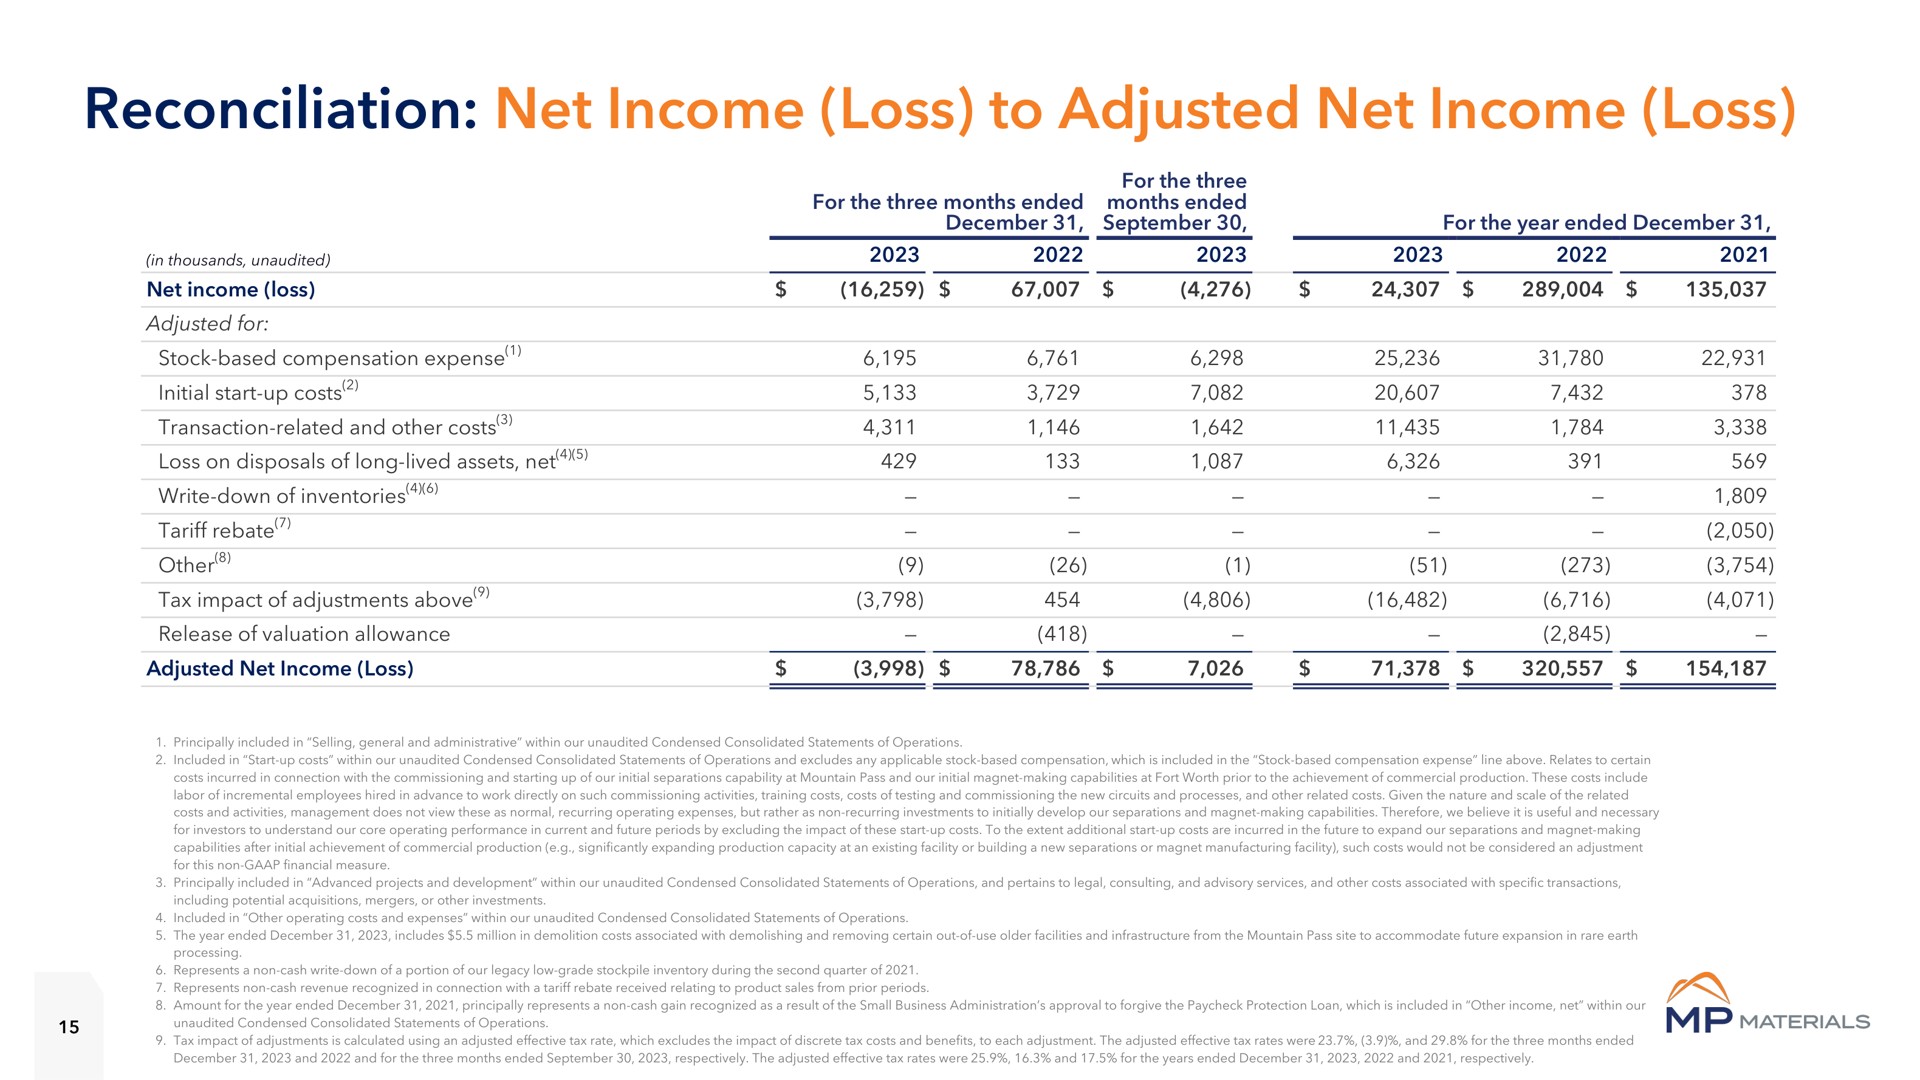 reconciliation net income loss to adjusted net income loss | MP Materials